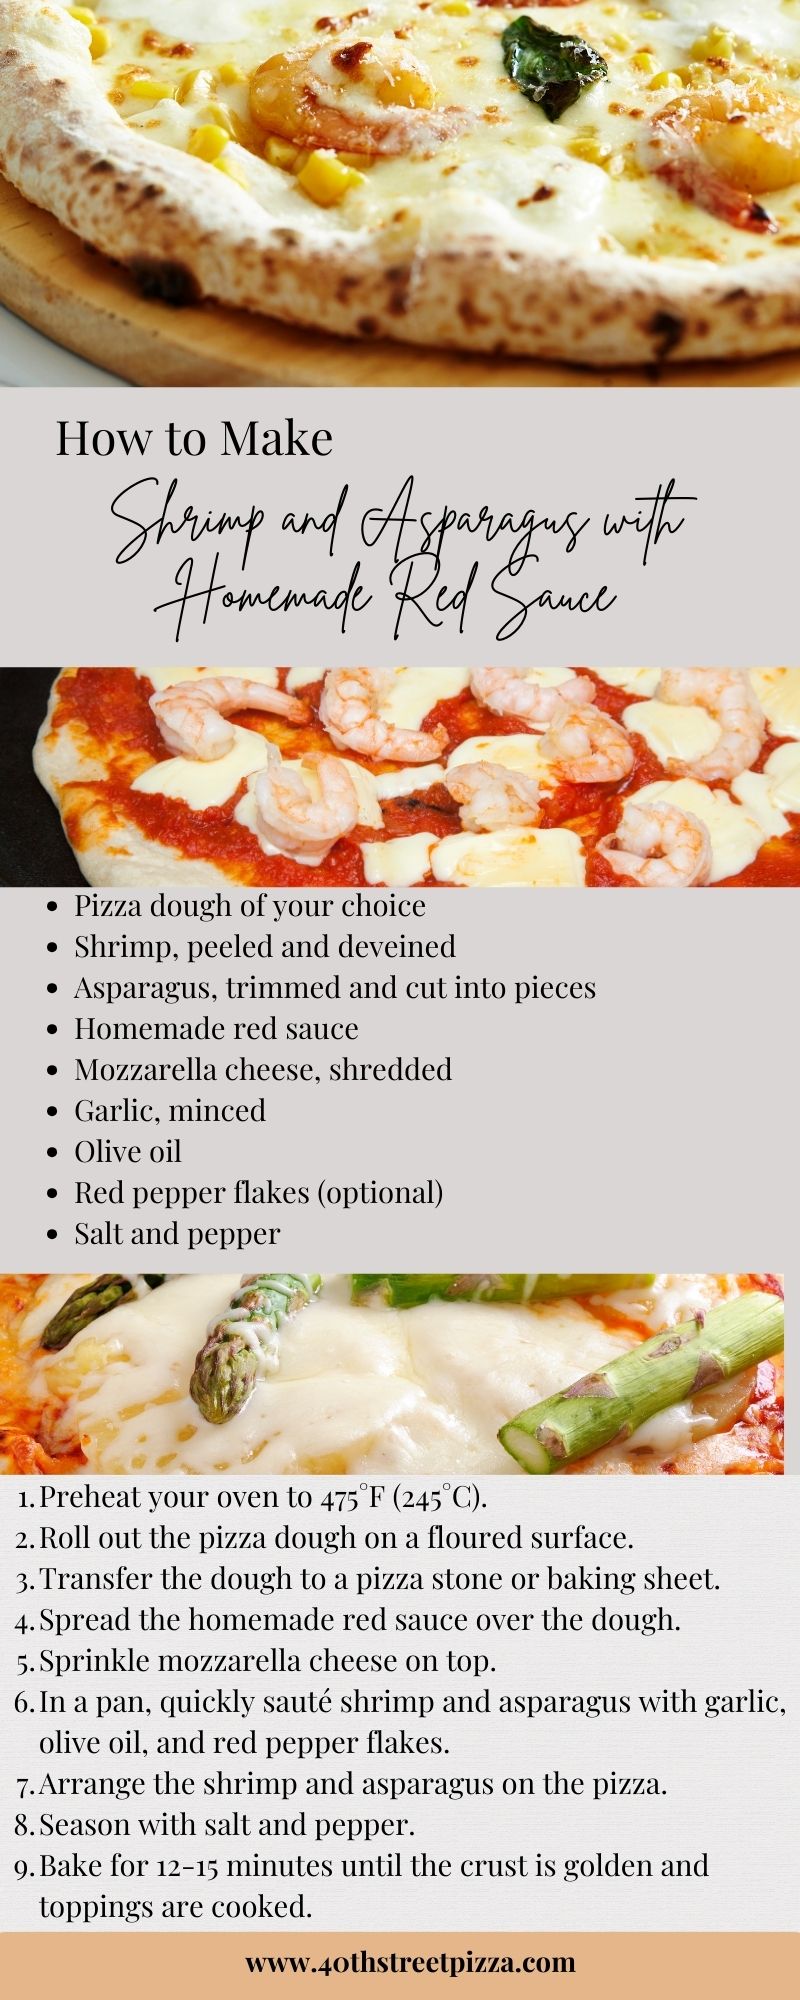 Shrimp and Asparagus with Homemade Red Sauce infographic